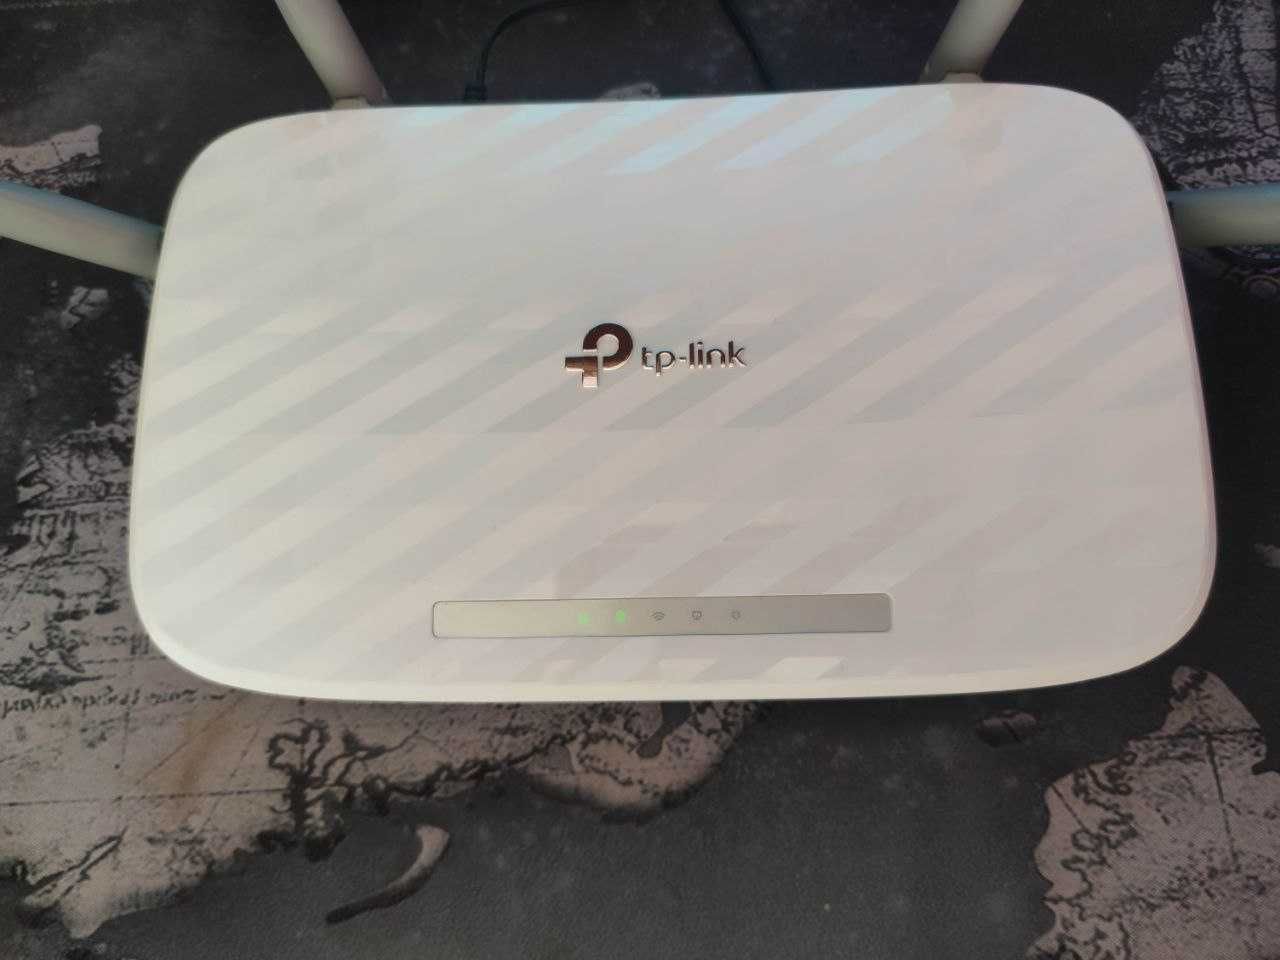 Маршрутизатор TP-LINK Archer C50